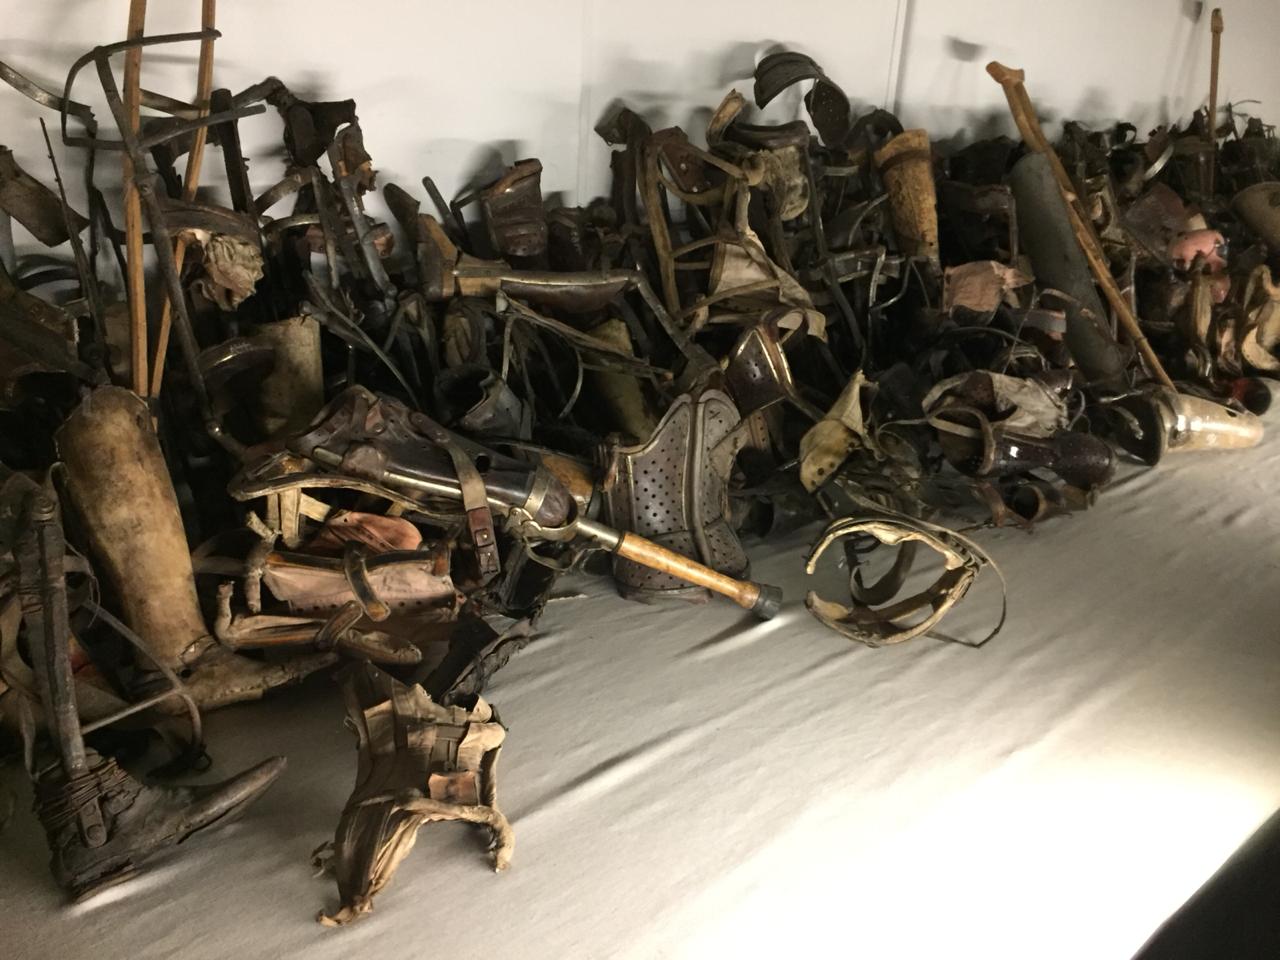 Prosthetics stolen from victims at Auschwitz